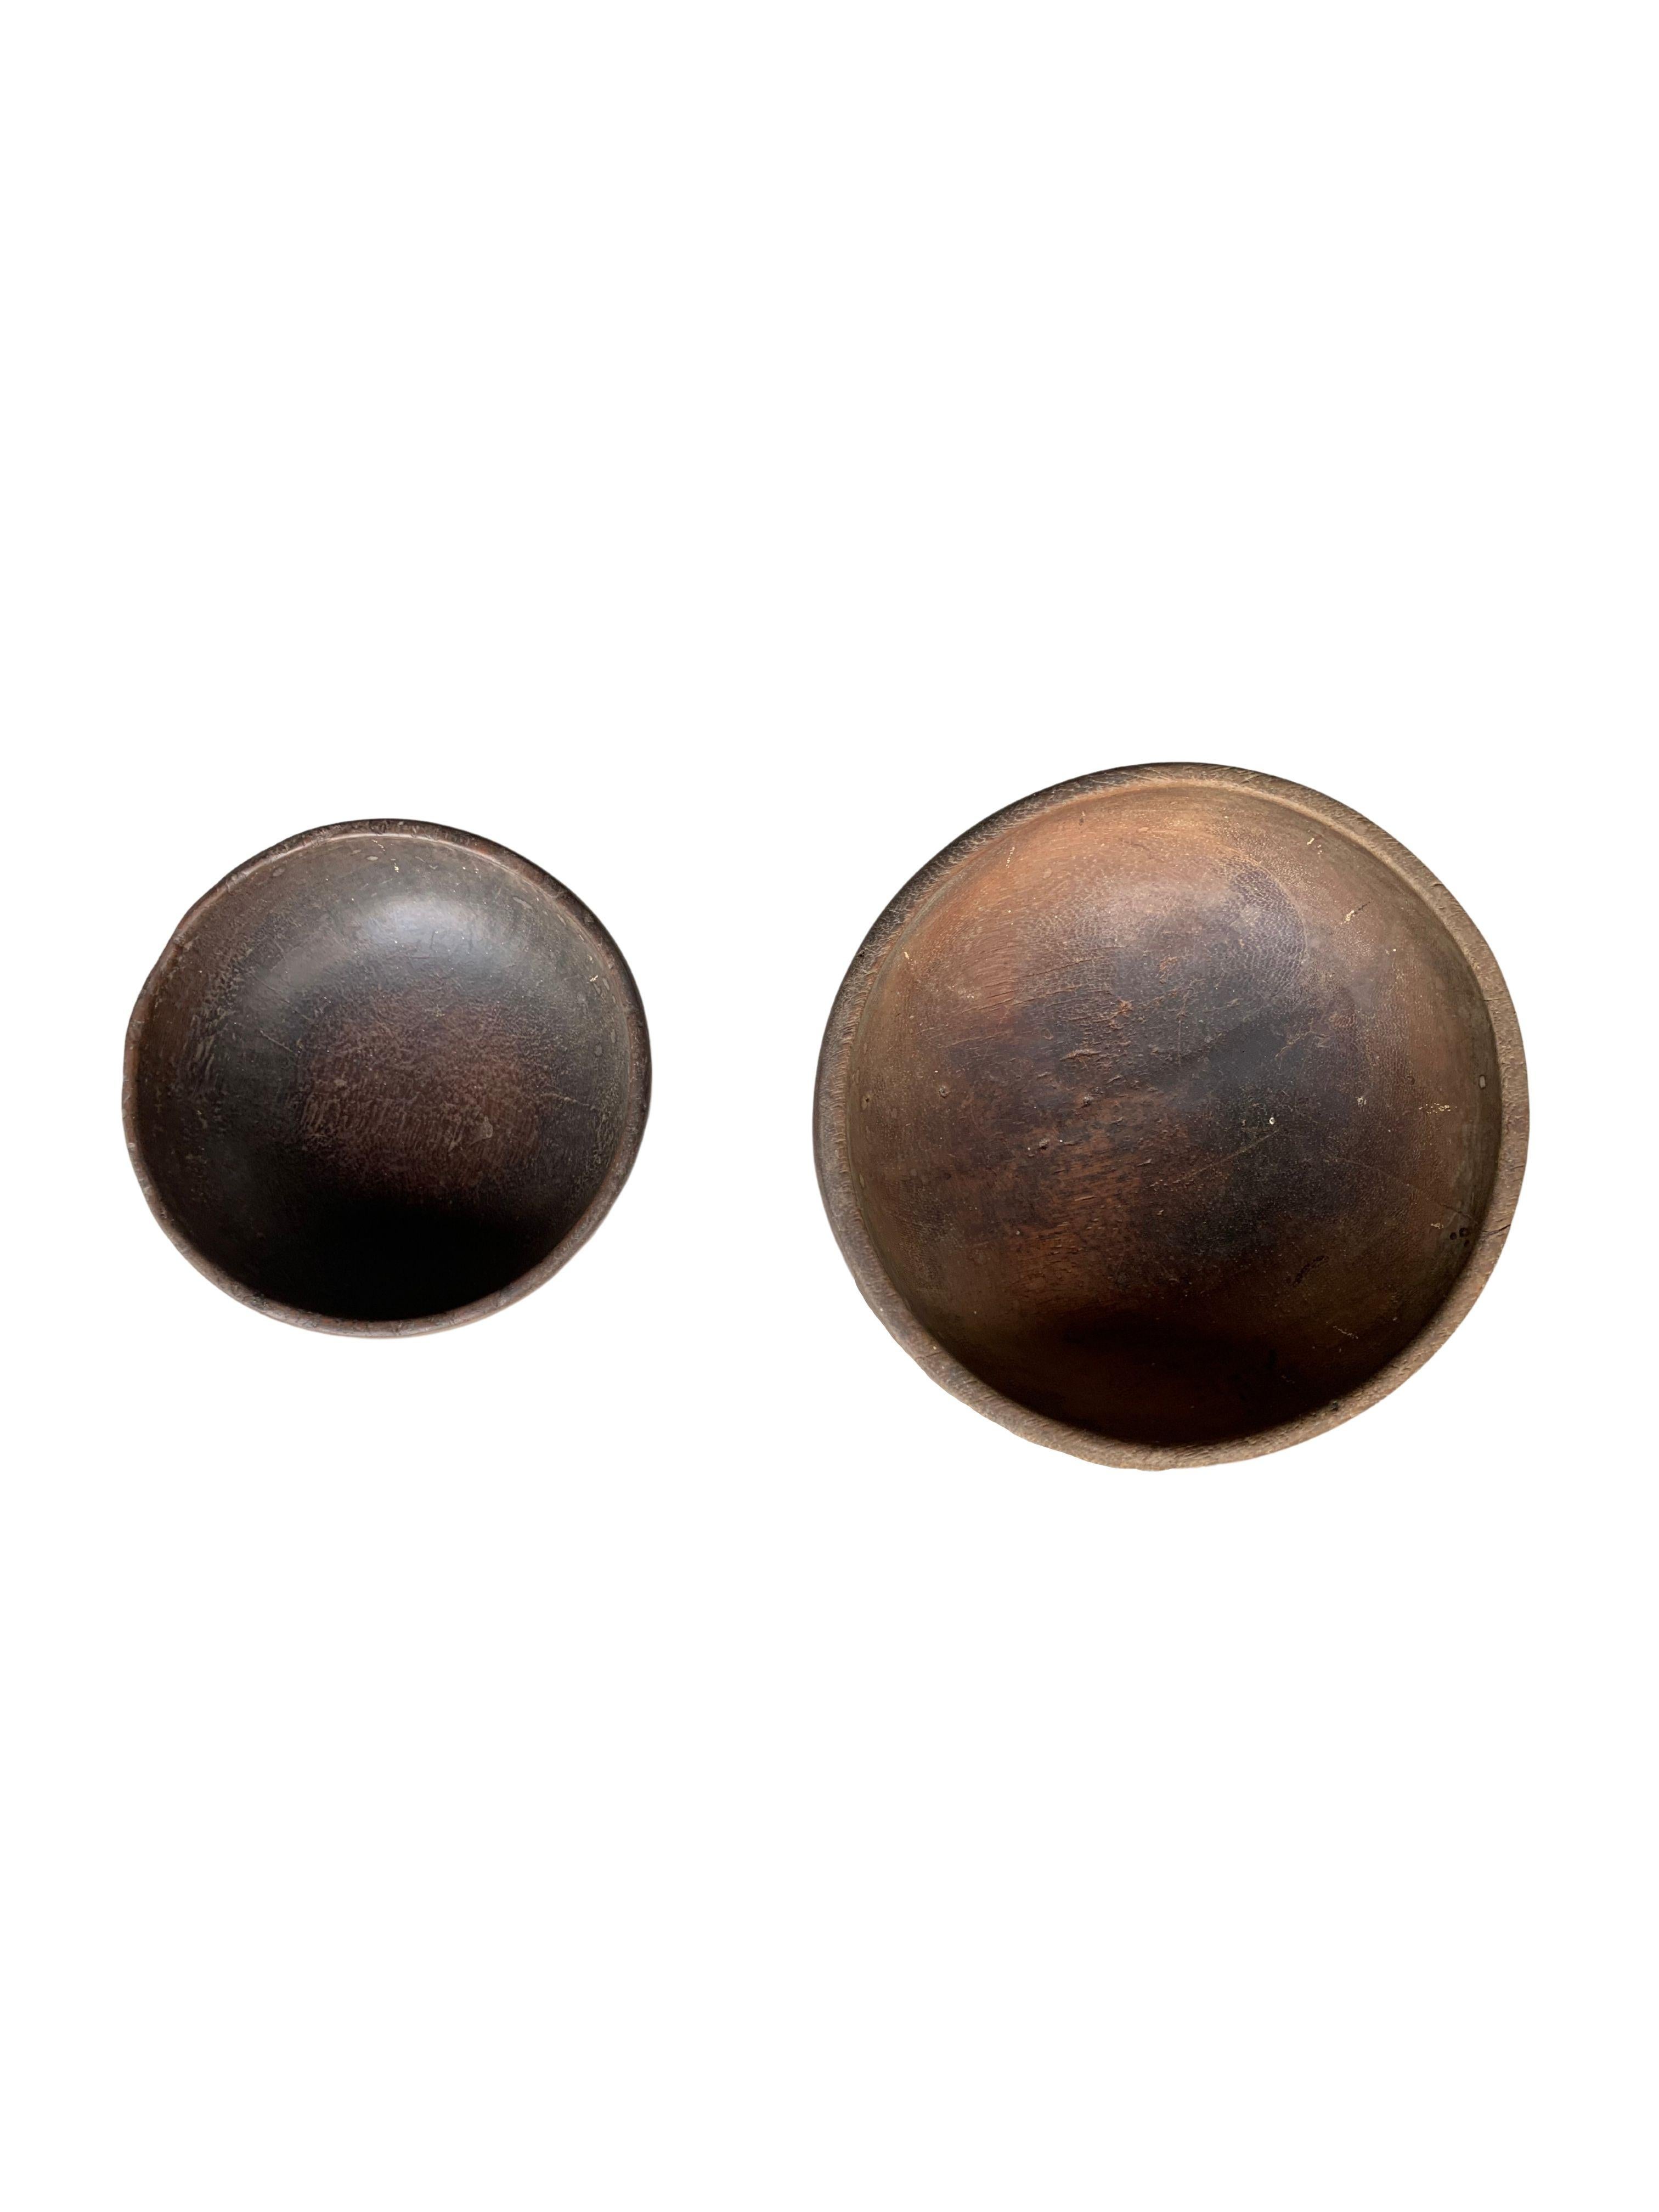 Hand-Crafted Pair of Toraja Wood Ceremonial Bowls, Sulawesi, Indonesia, c. 1900 For Sale